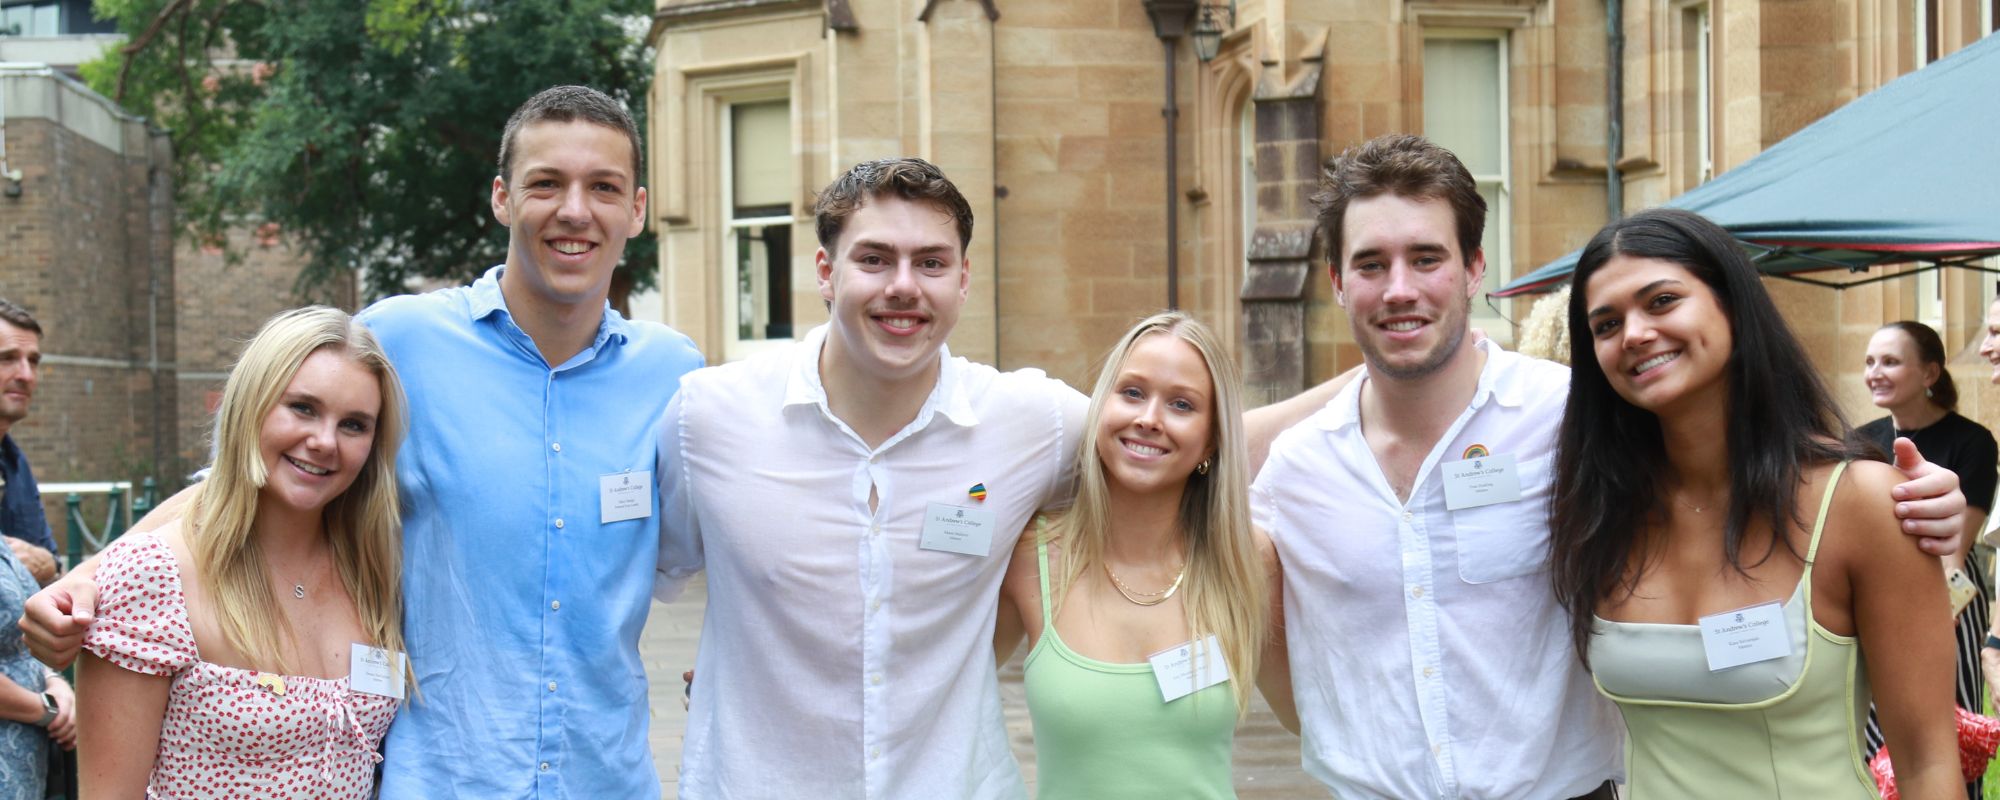 St Andrew's College Students Open Day